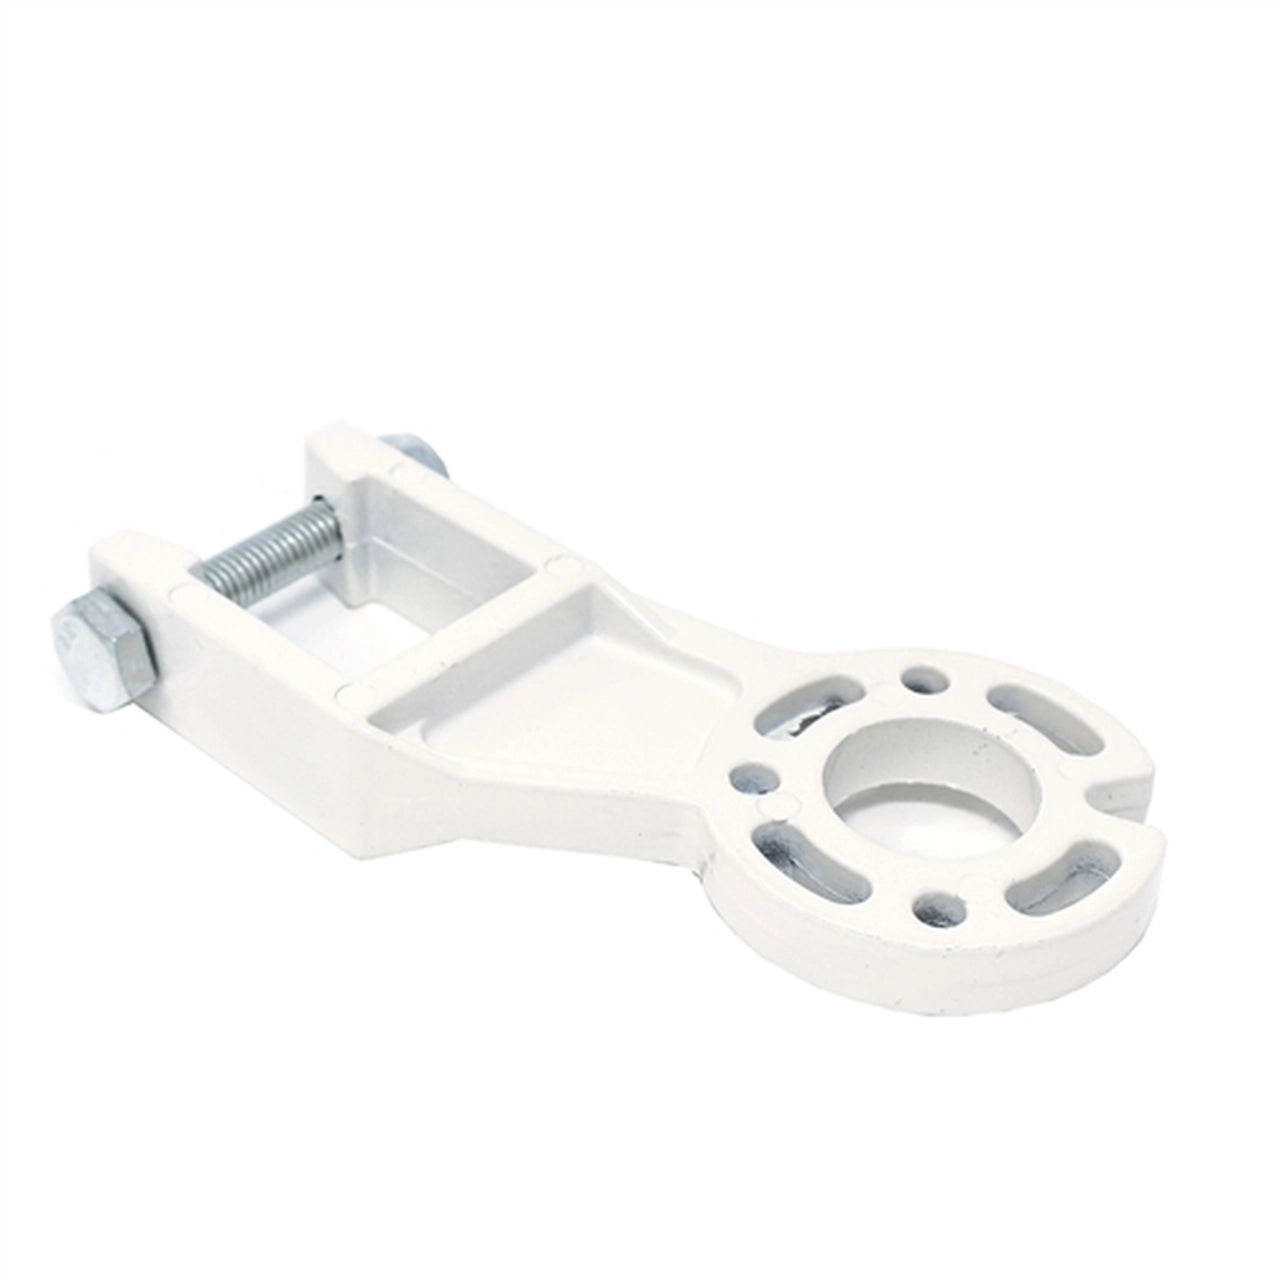 Aleko Support Bracket for Retractable Awning Gearbox - White